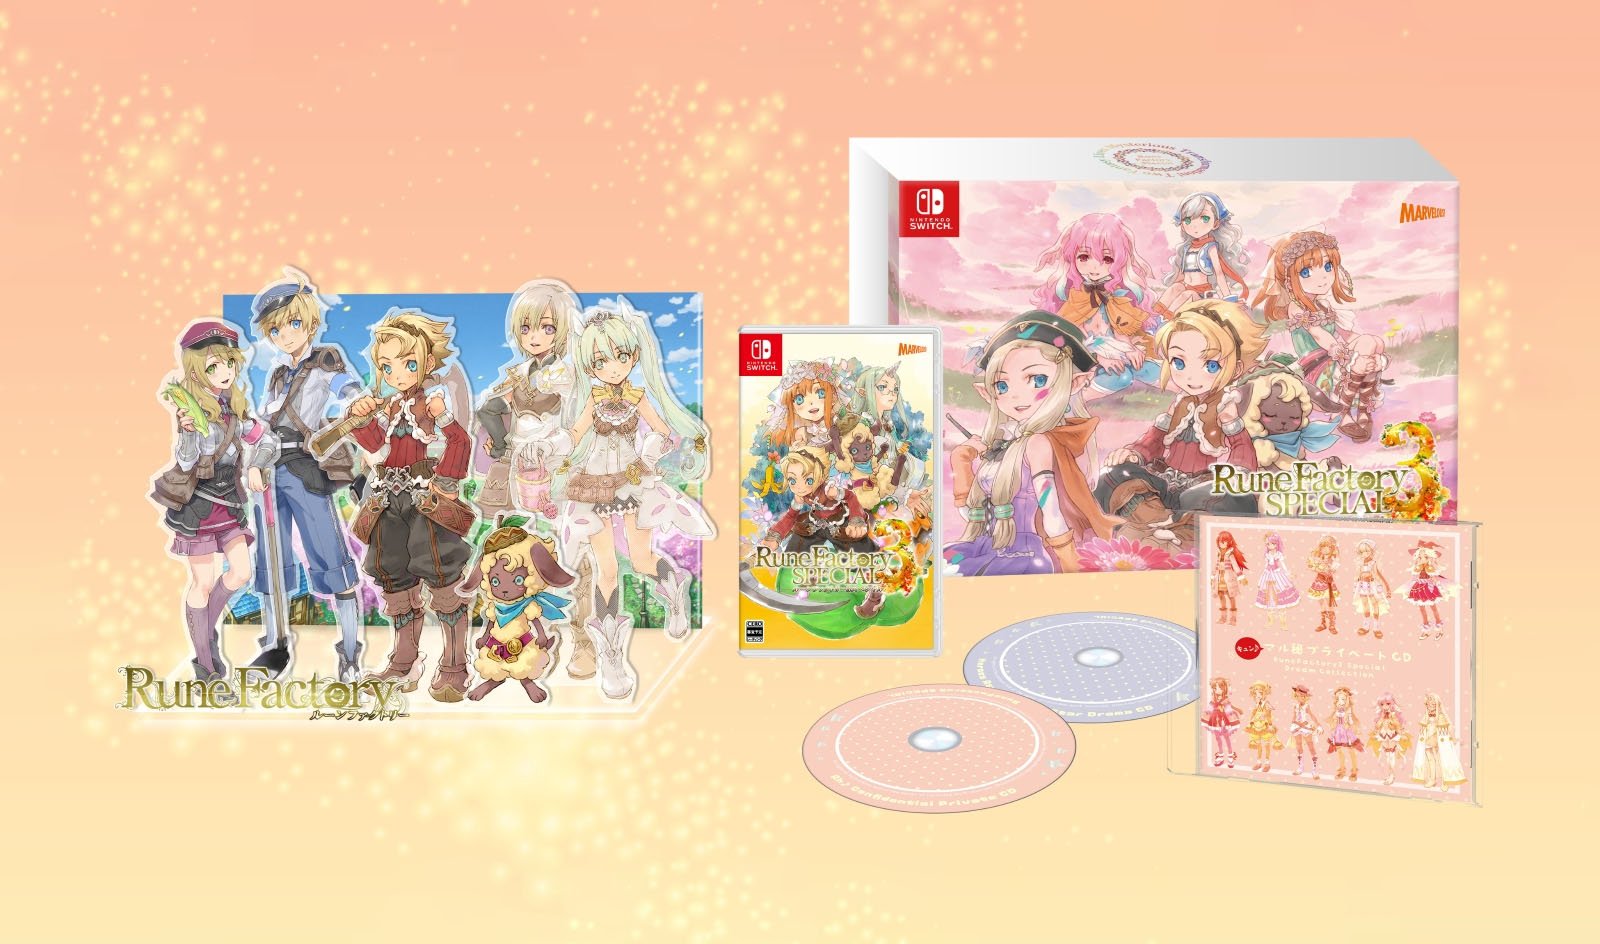 #
      Rune Factory 3 Special launches March 2, 2023 in Japan